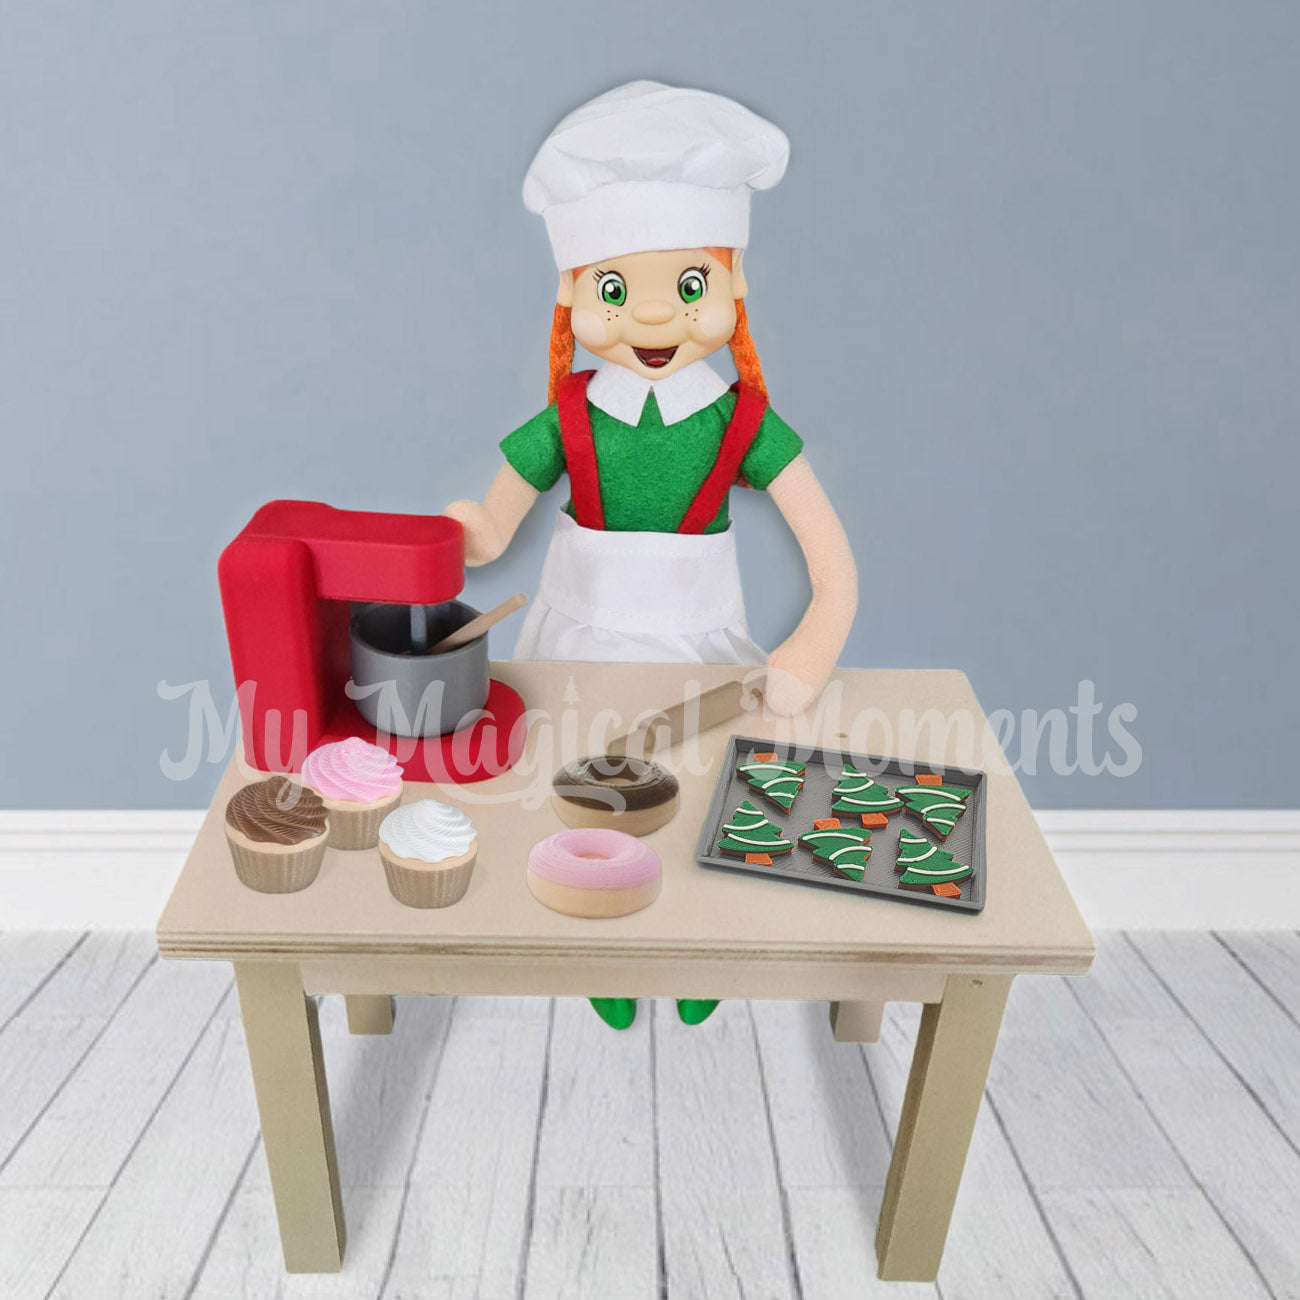 elf dressed as a chef using a red miniature baking mixer to make donuts, cupcakes a tiny gingerbread cookies